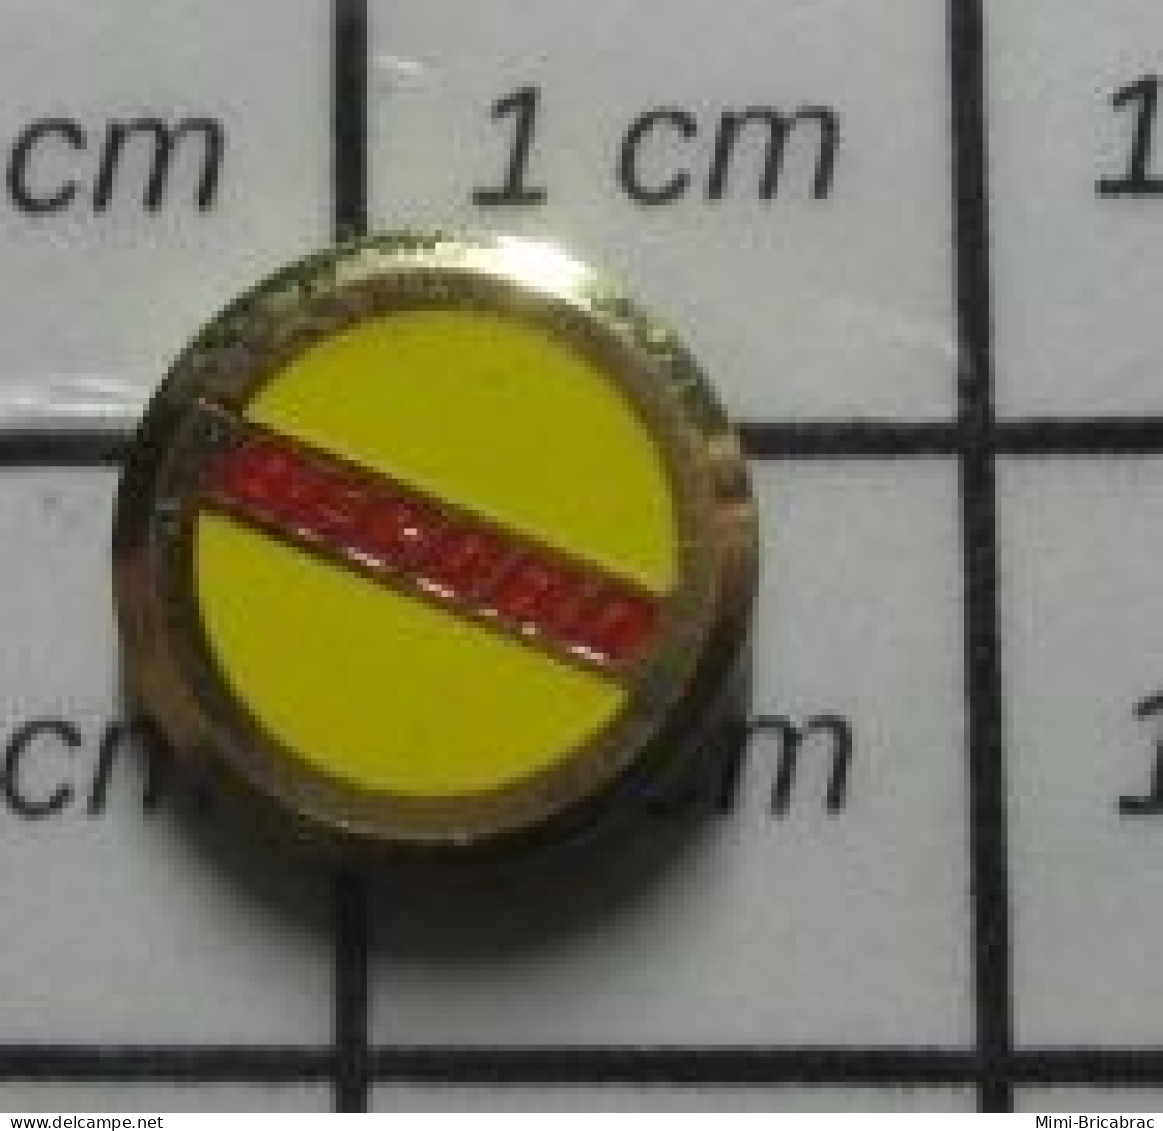 519 Pin's Pins / Beau Et Rare / MARQUES / Mini Pin's Rond RECORD - Trademarks